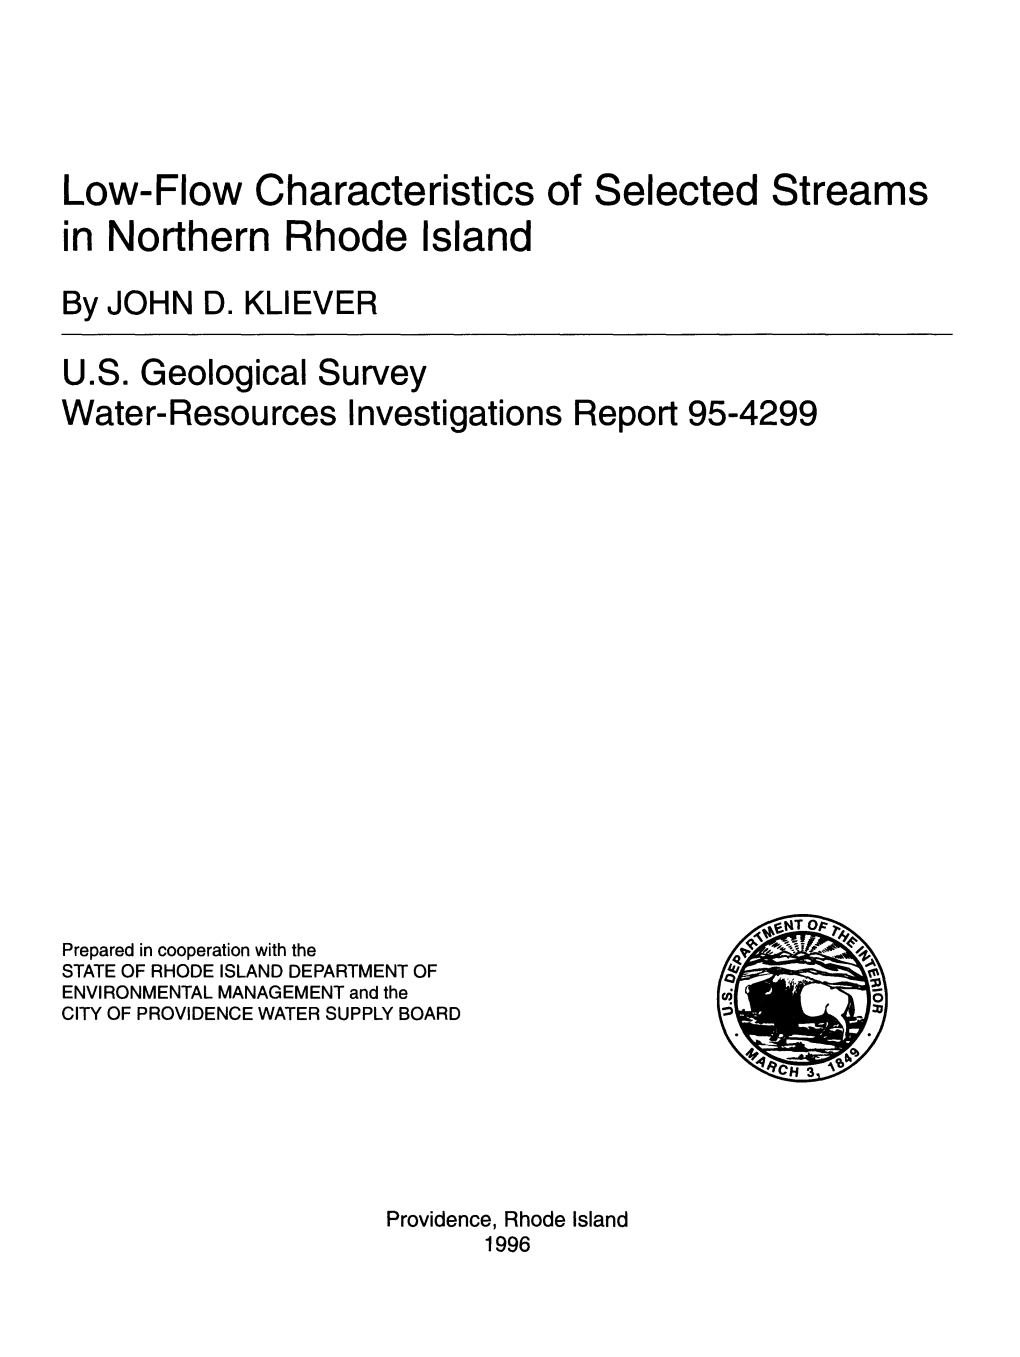 Low-Flow Characteristics of Selected Streams in Northern Rhode Island by JOHN D